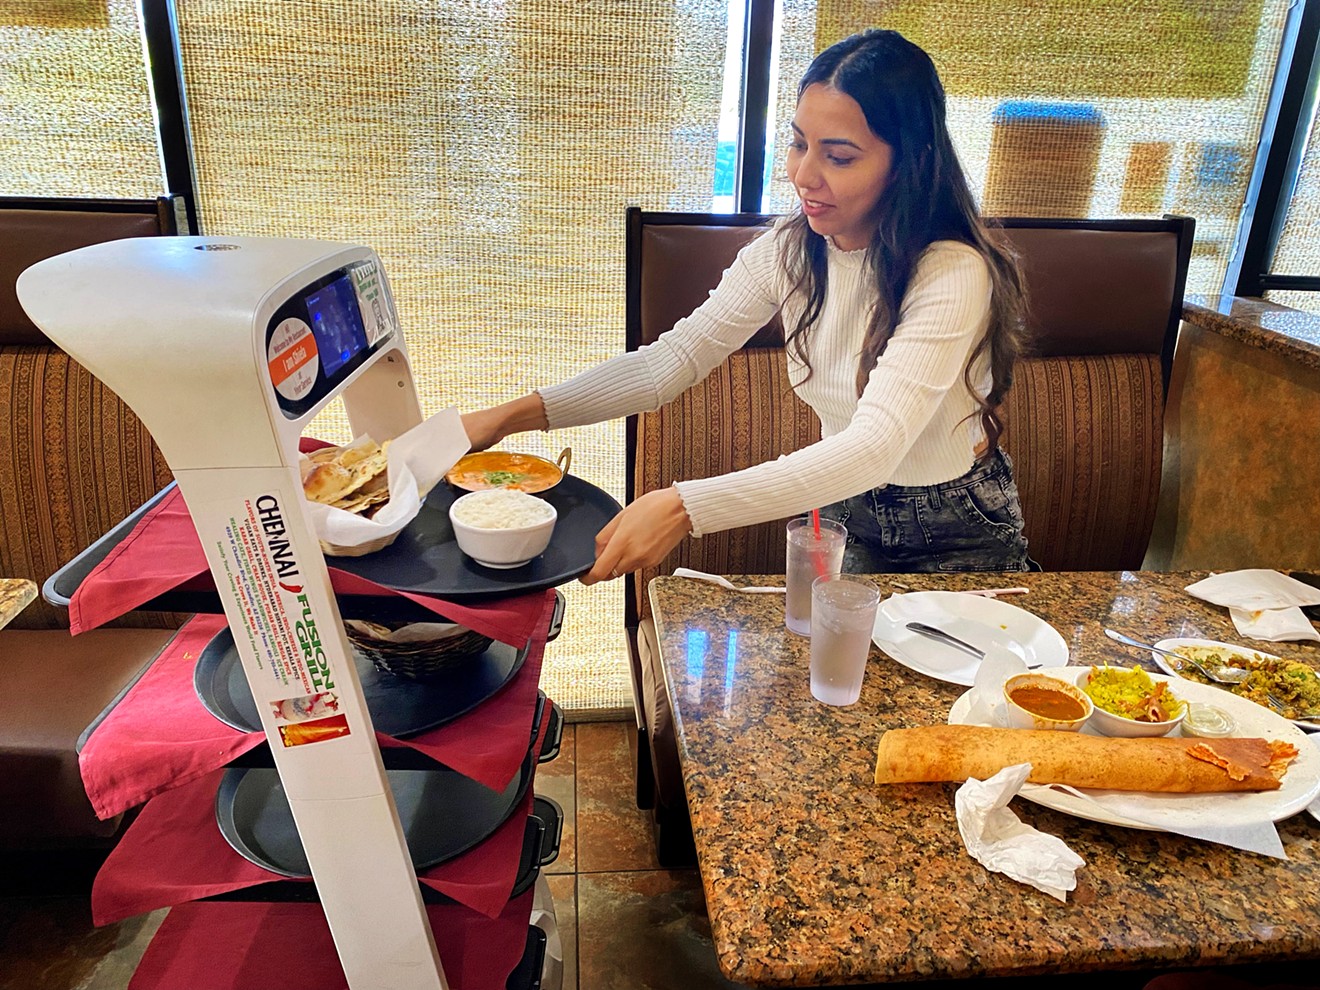 Joty Kaur of Litchfield Park lifts her dish from Shiela, the robot server at Chennai Fusion Grill in Chandler.